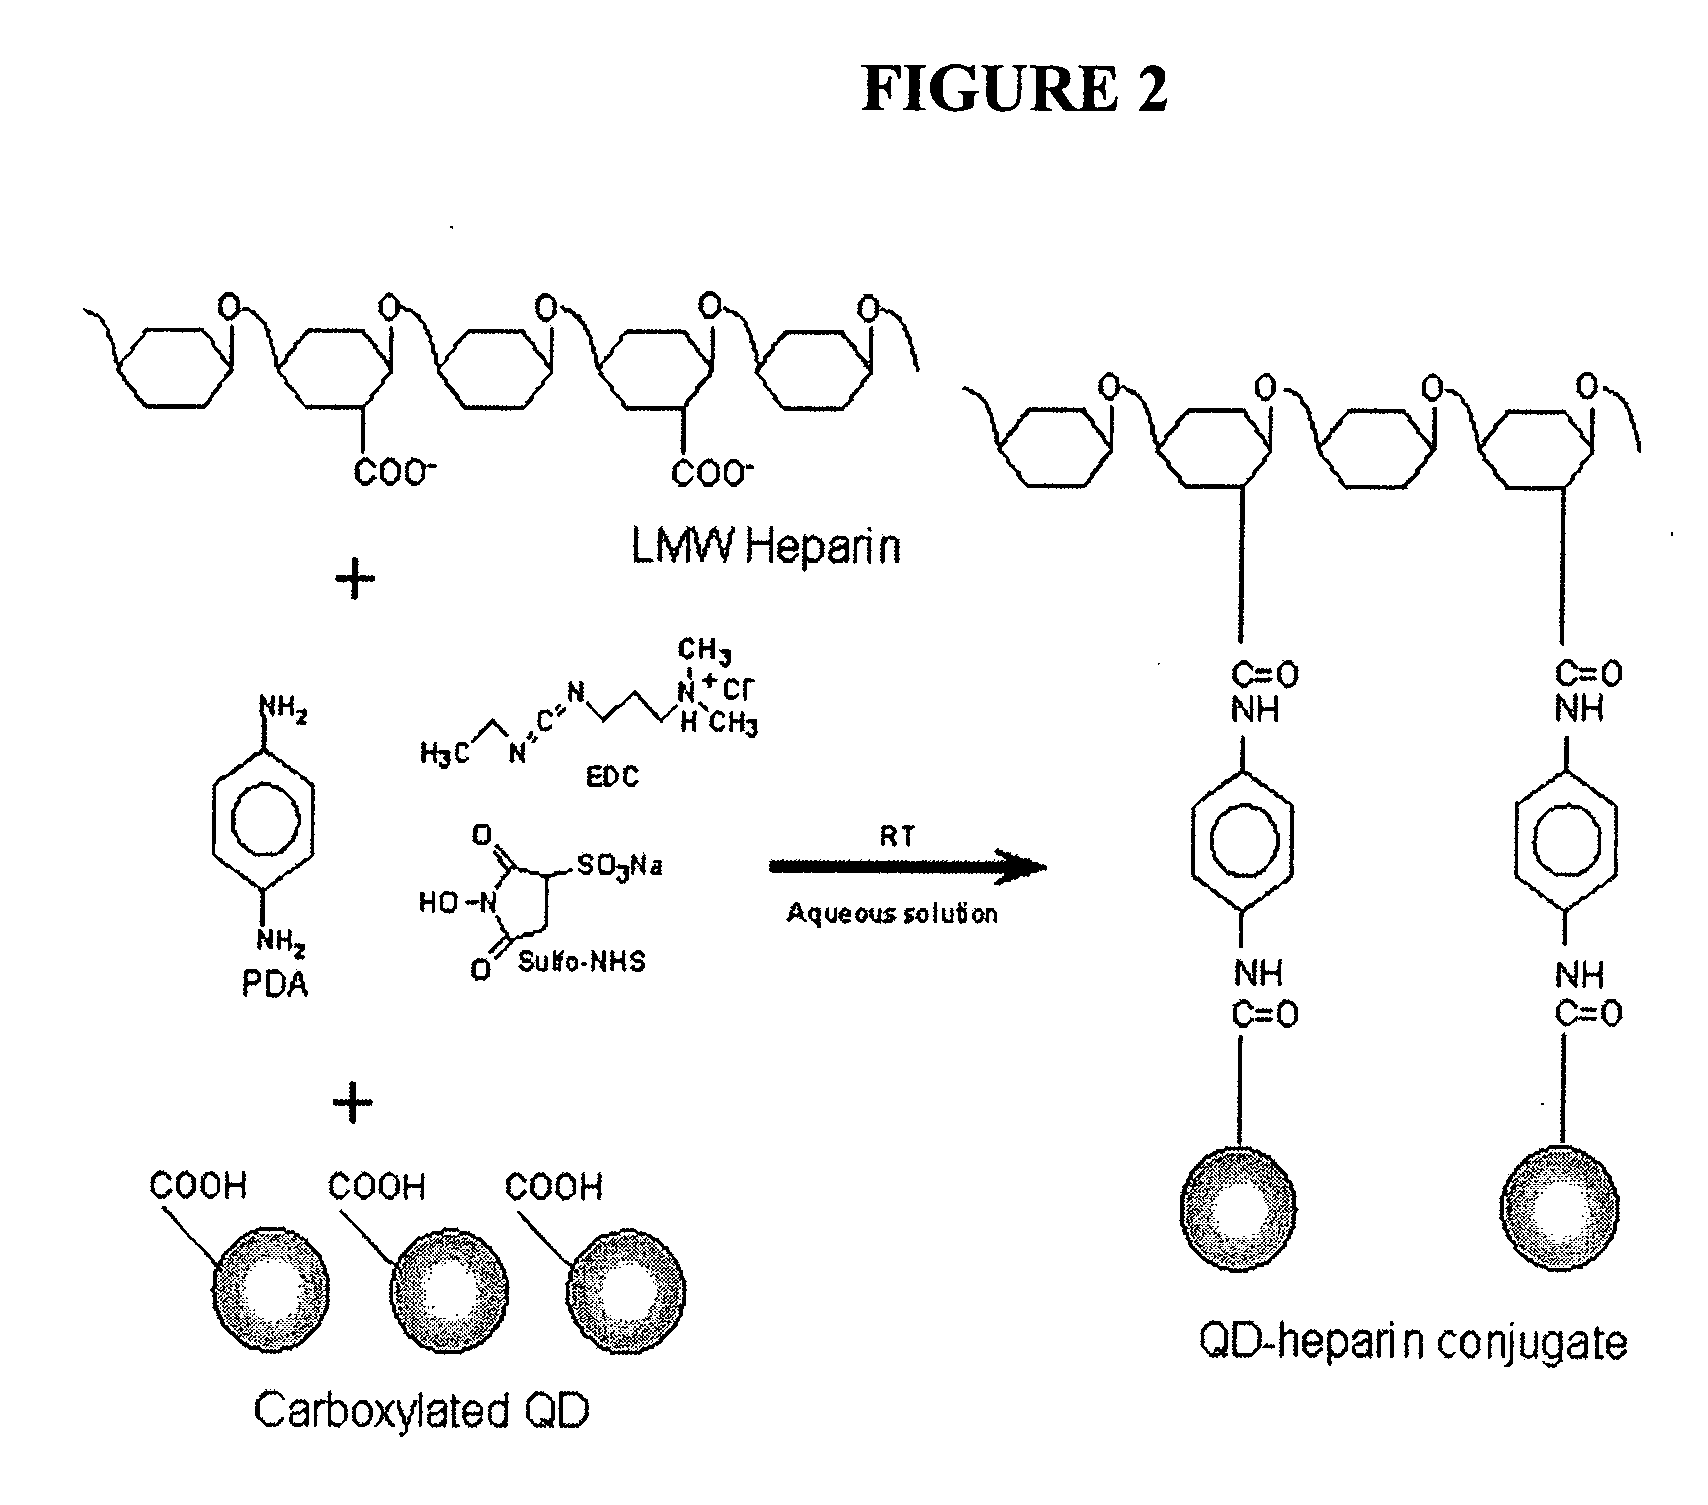 Cell scaffold matrices with incorporated therapeutic agents